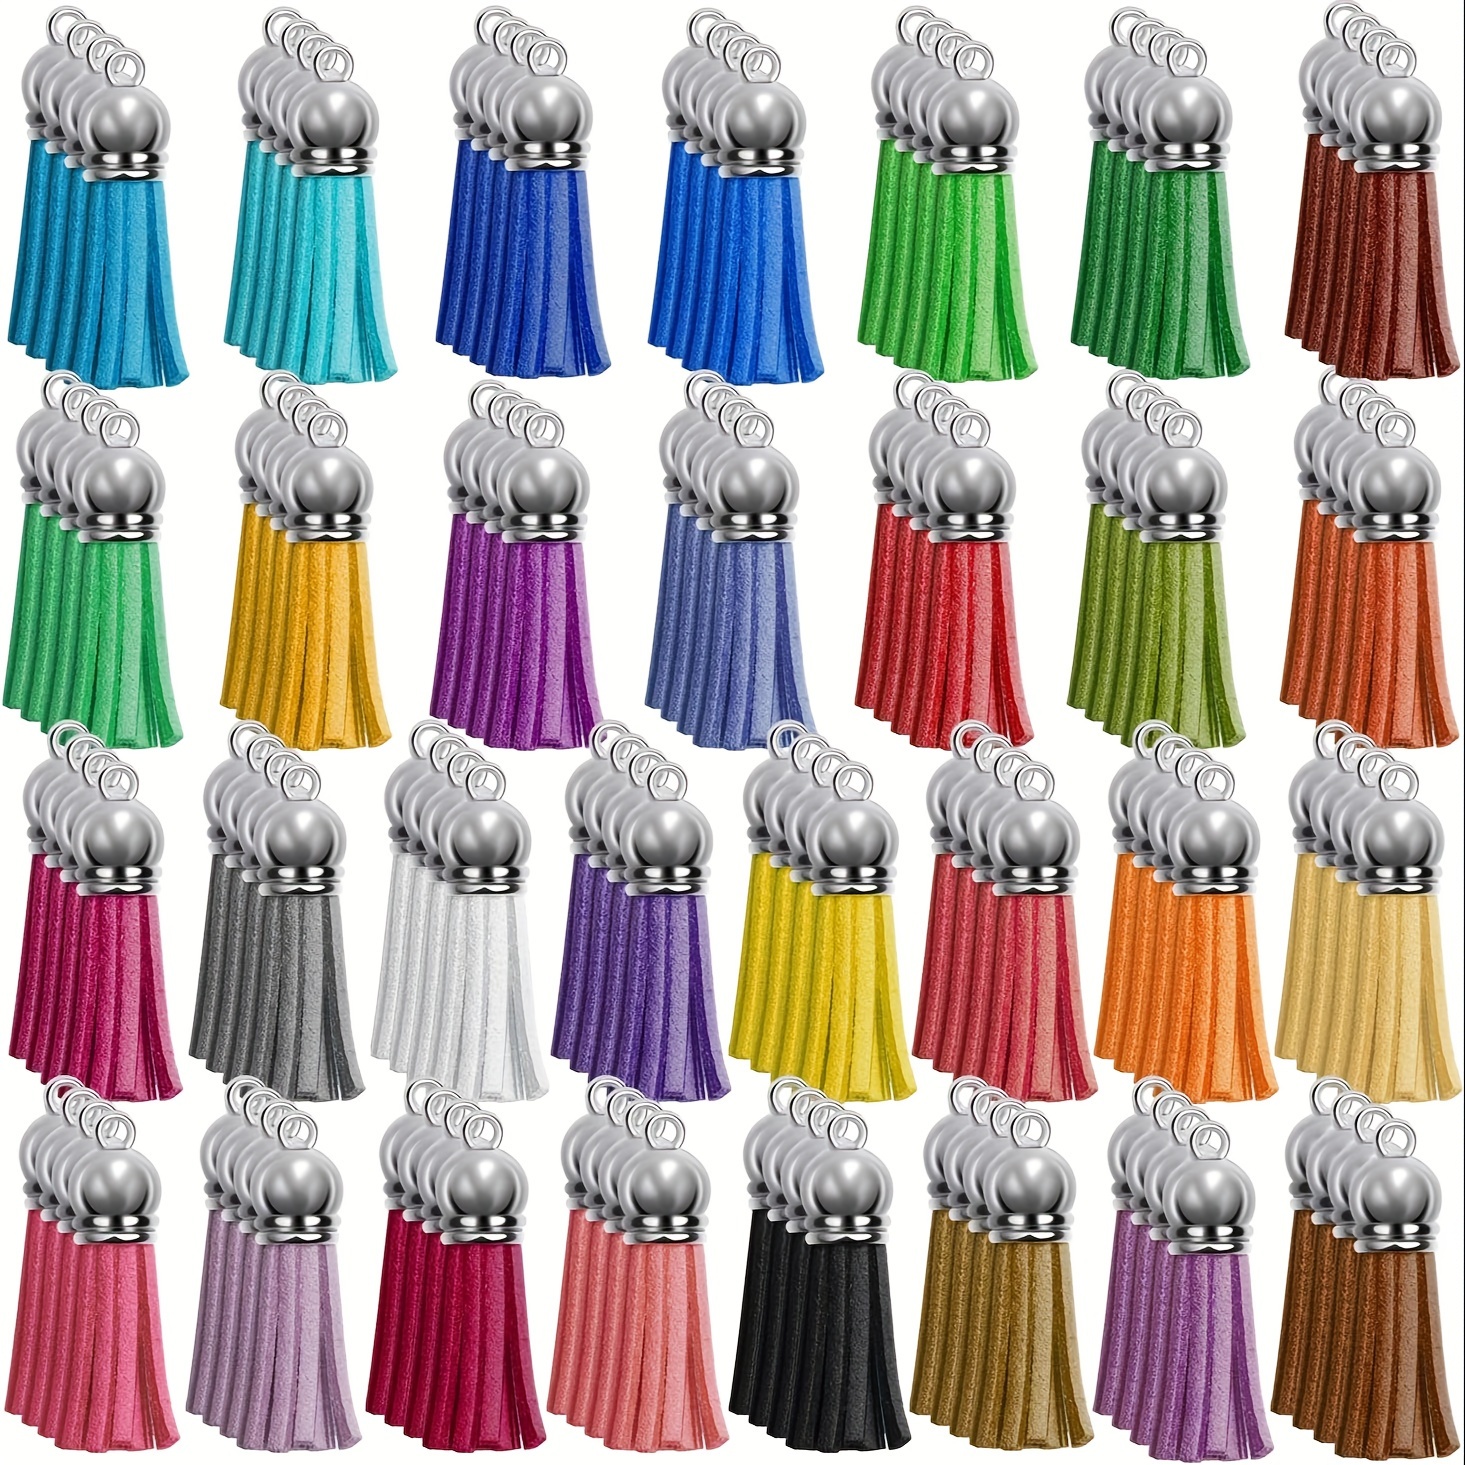 

120pcs Multicolor Tassels With Acrylic Keychain Blanks And Rings, Assorted Colors Bulk Set For Diy Crafts, Handmade Keychains & Jewelry Making Supplies